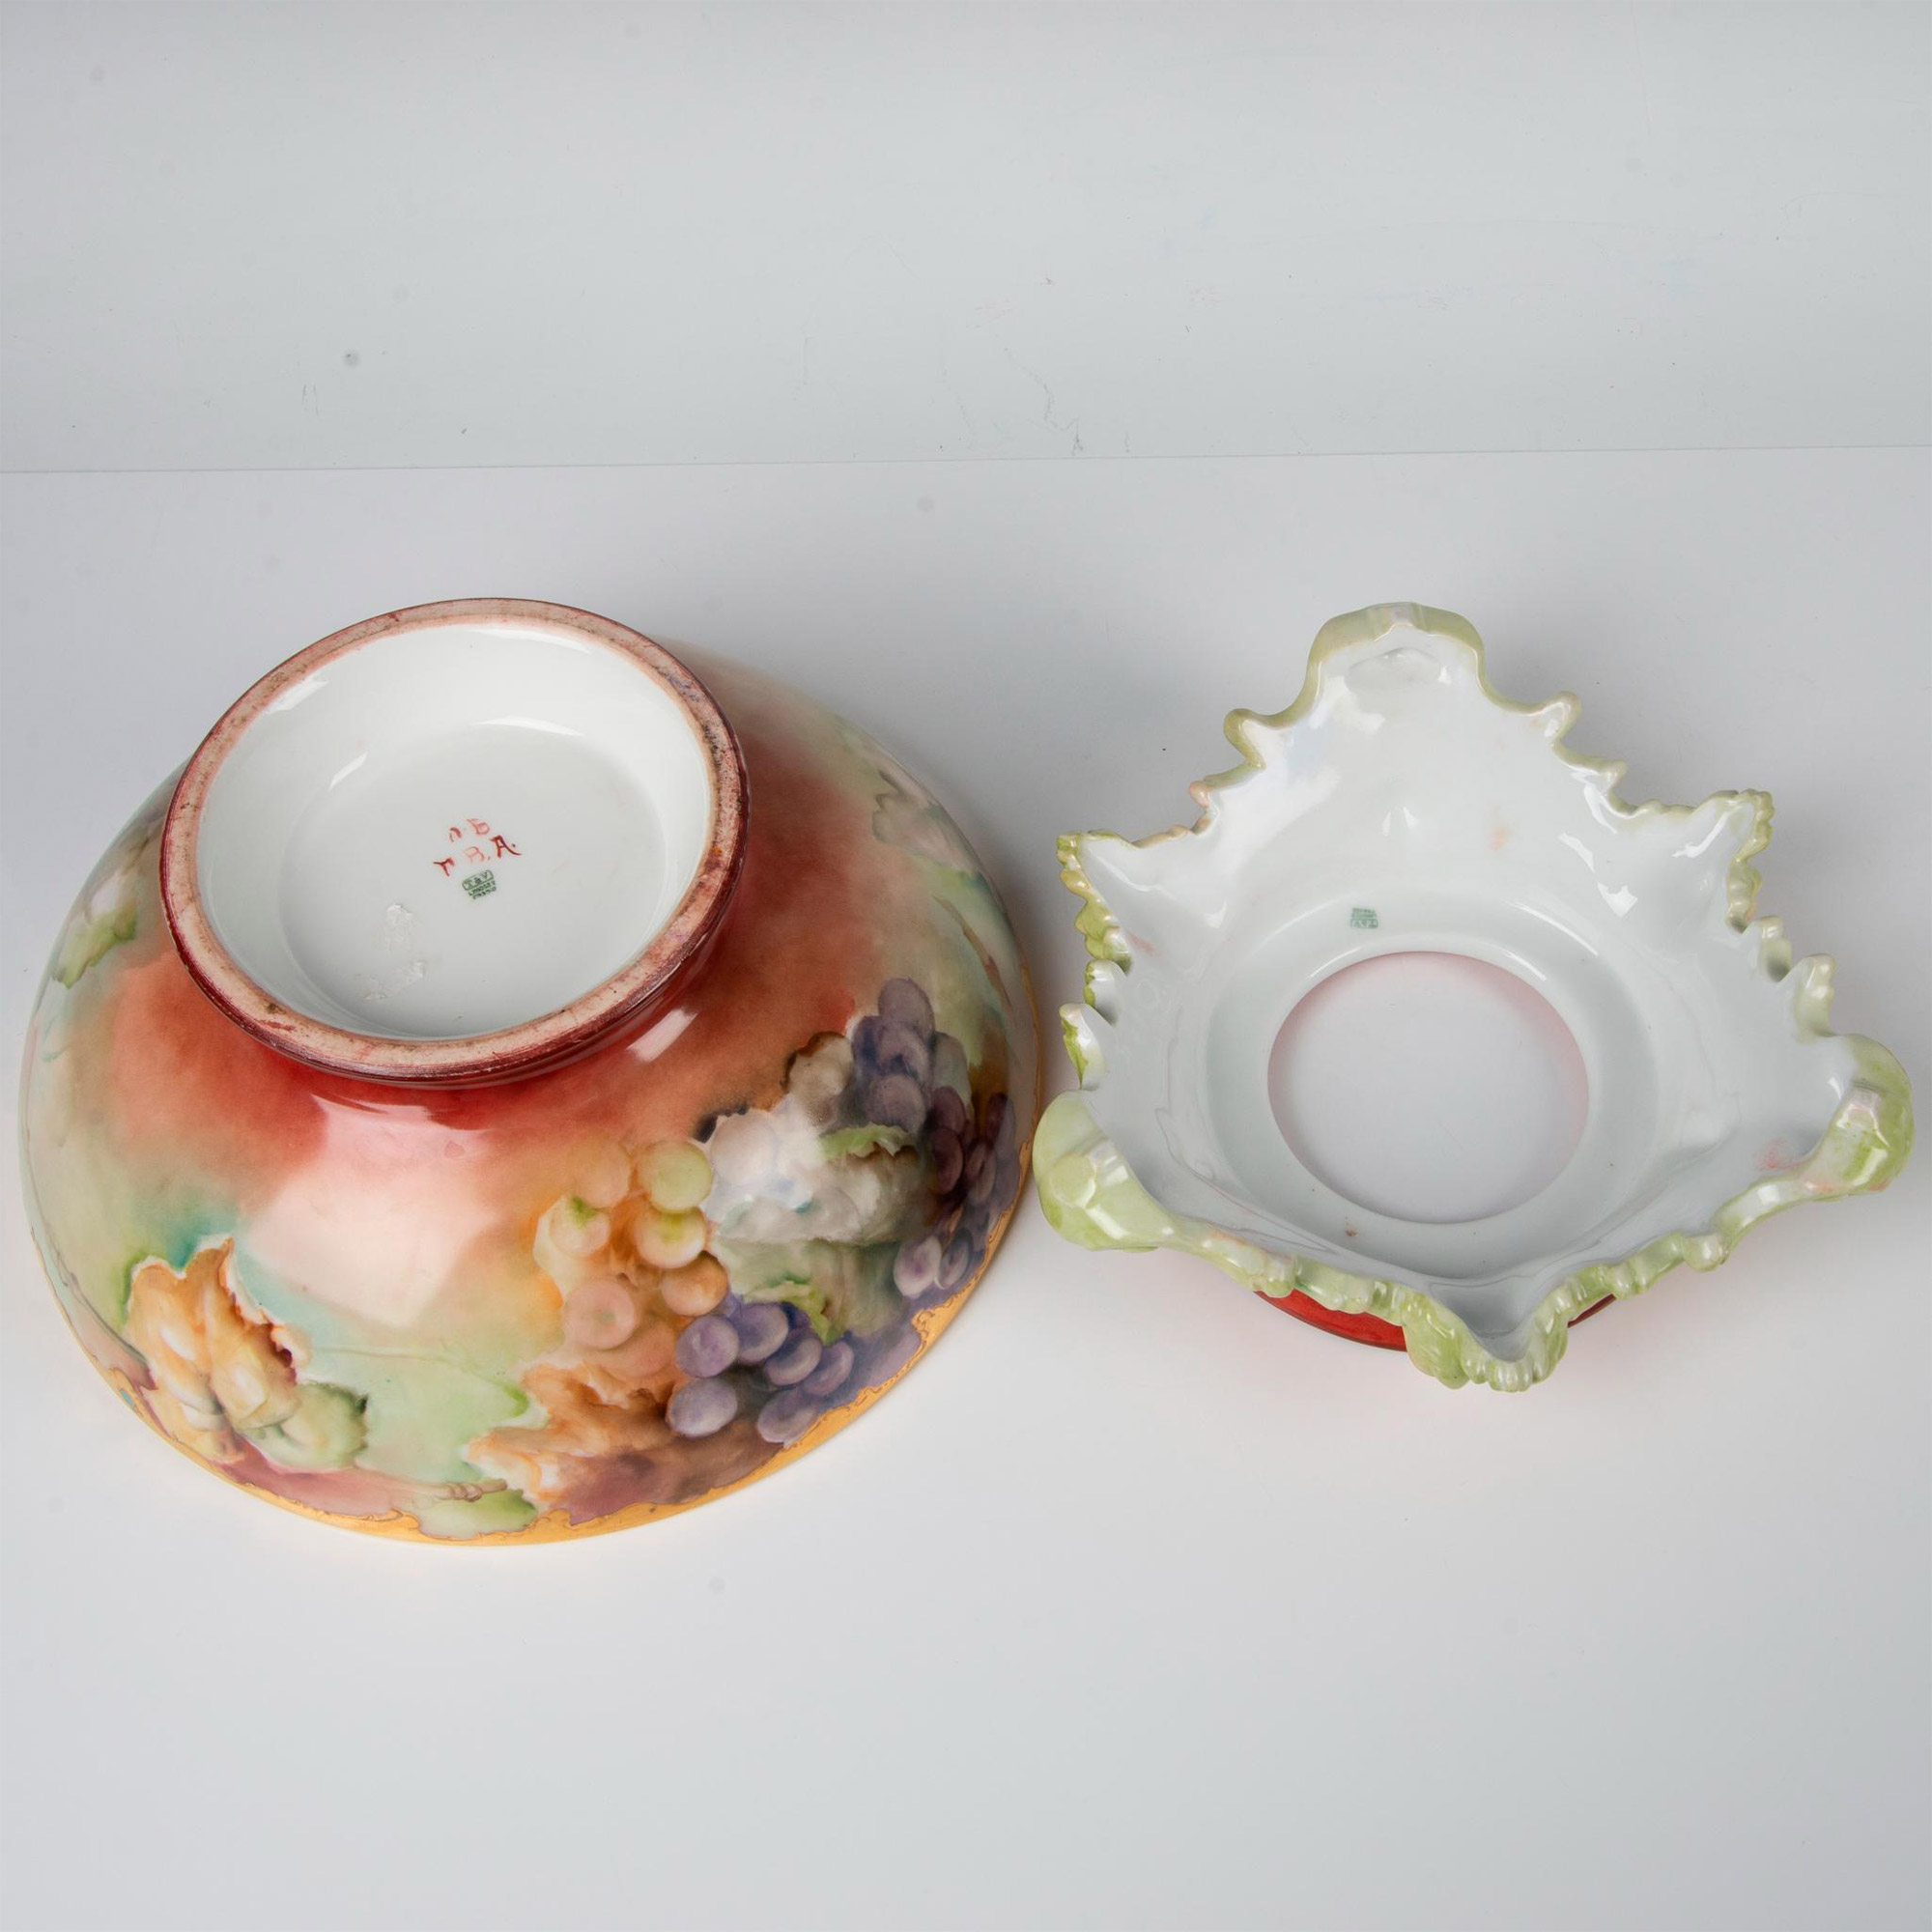 2pc Tressemanes & Vogt Limoges Hand Painted Punch Bowl with Stand - Image 6 of 8